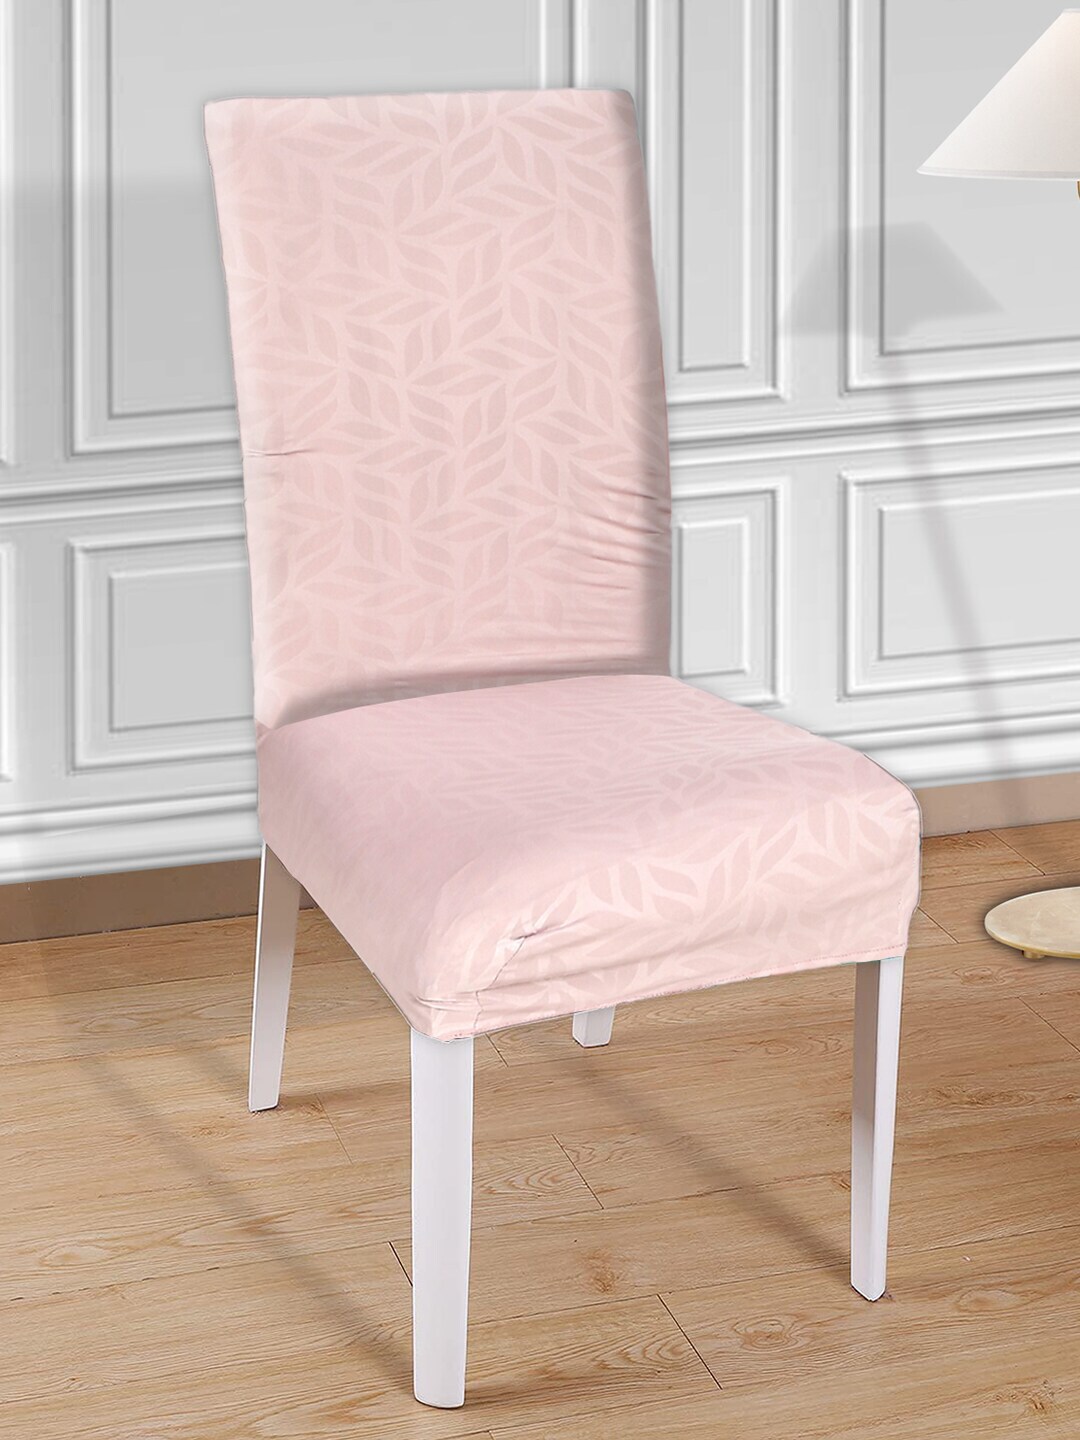 Kuber Industries Set Of 6 Pink Printed Chair Covers Price in India